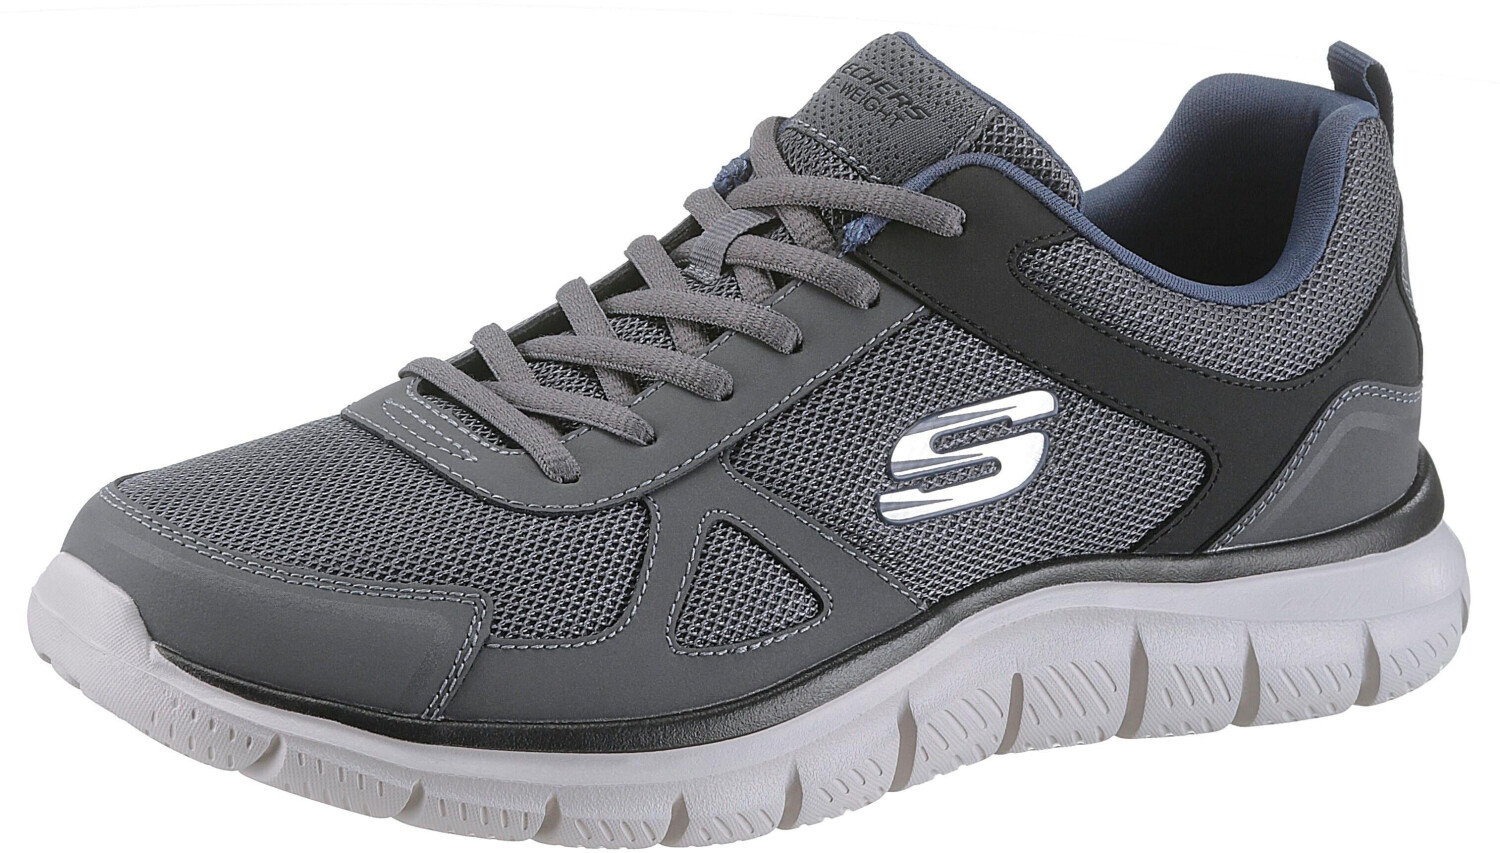 Buy Skechers Track Scloric navy from £35.00 (Today) – Best Deals on ...